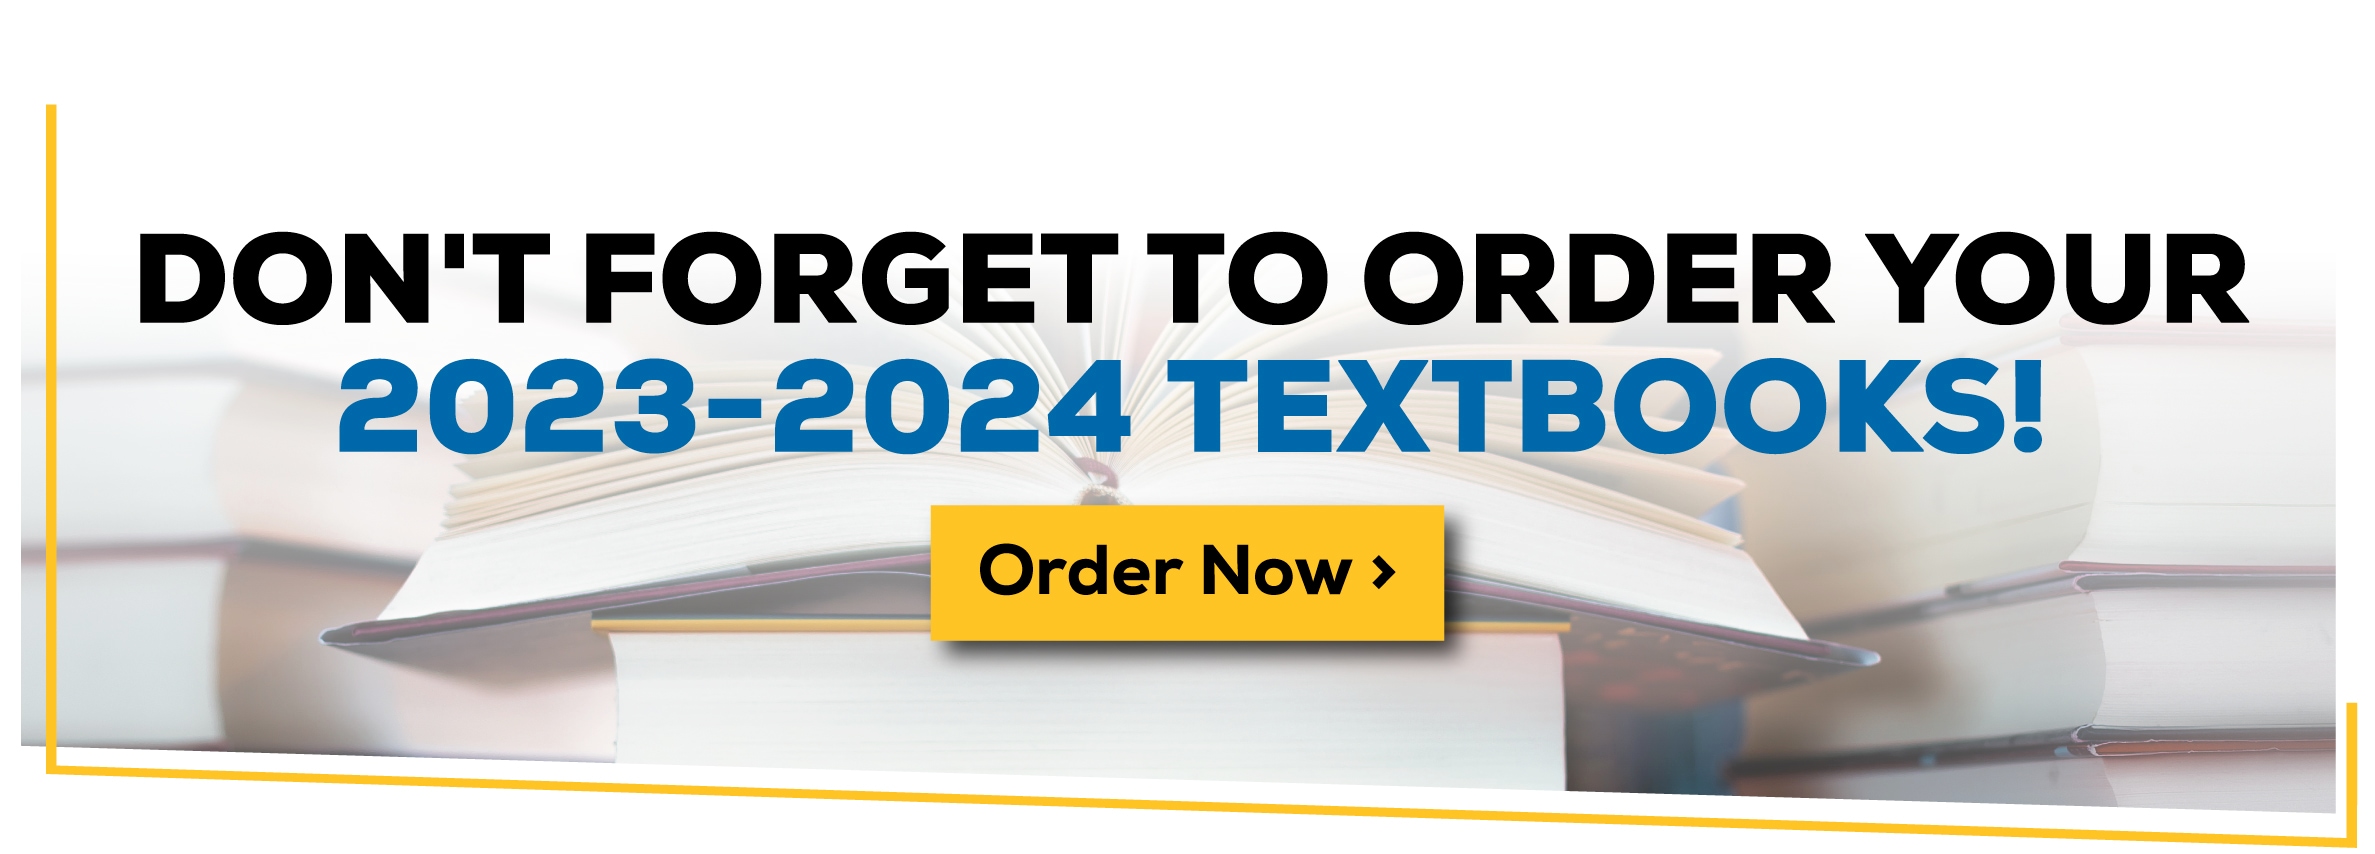 Don't Forget to Order Your 2023-2024 Textbooks! Order Now